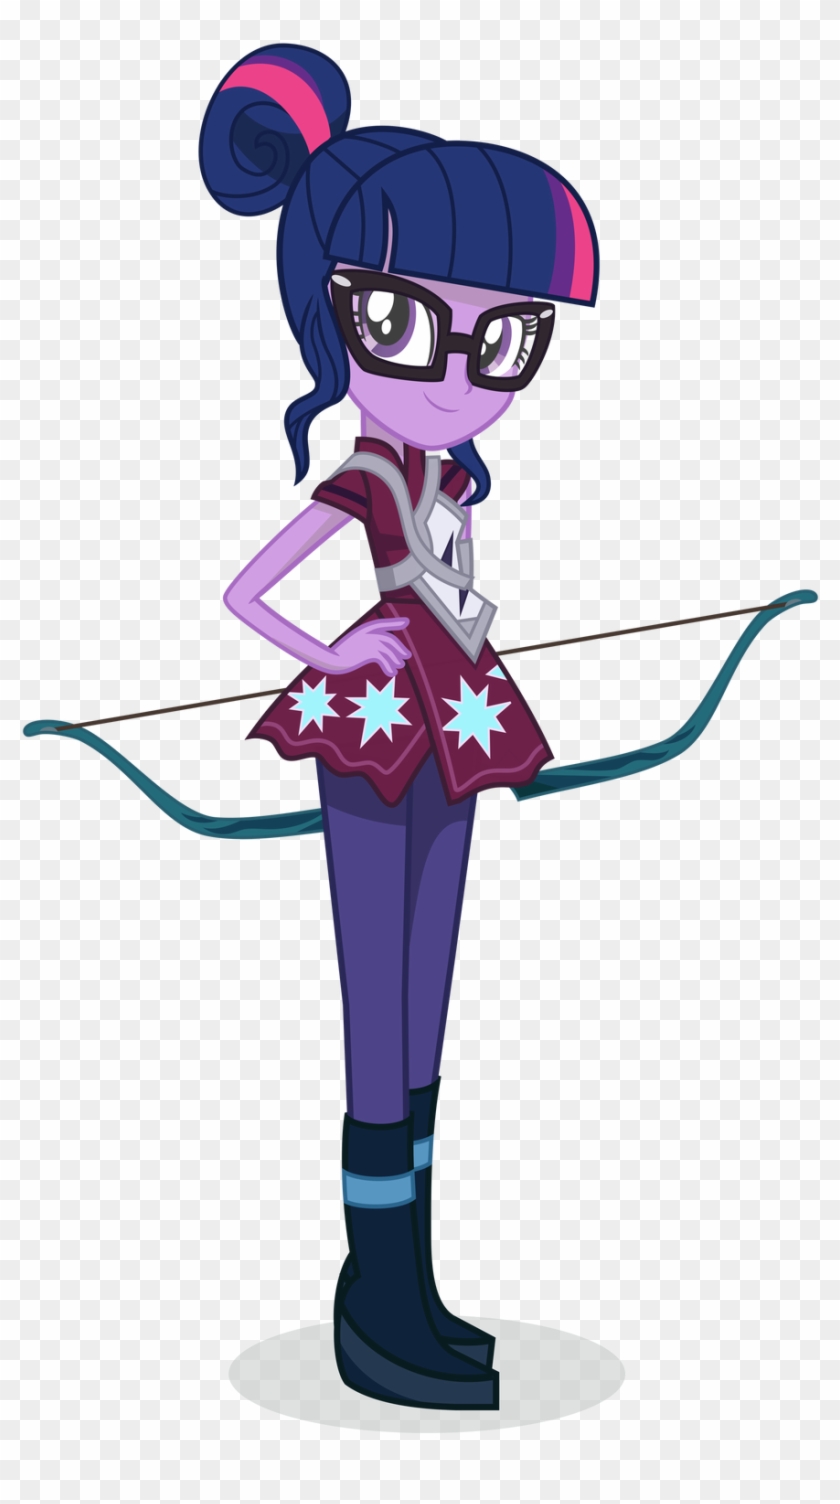 Ivacatherianoid Archer Alternate Twilight Sparkle Vector - Twilight Sparkle  Equestria Girl Friendship Games - Free Transparent PNG Clipart Images  Download